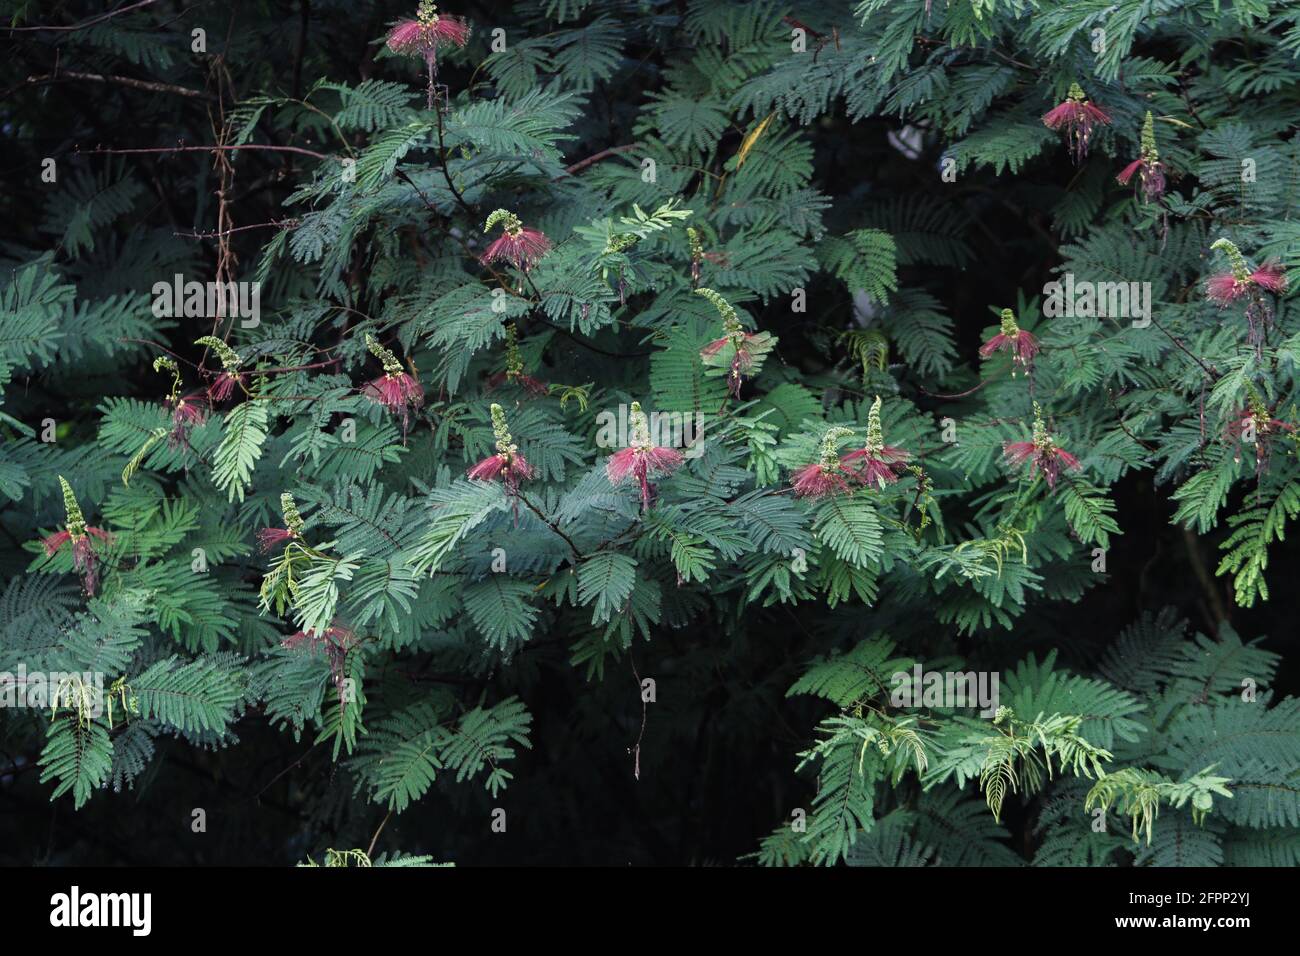 Calliandra calothyrsus with buds and open flowers. Tree pattern background. Stock Photo